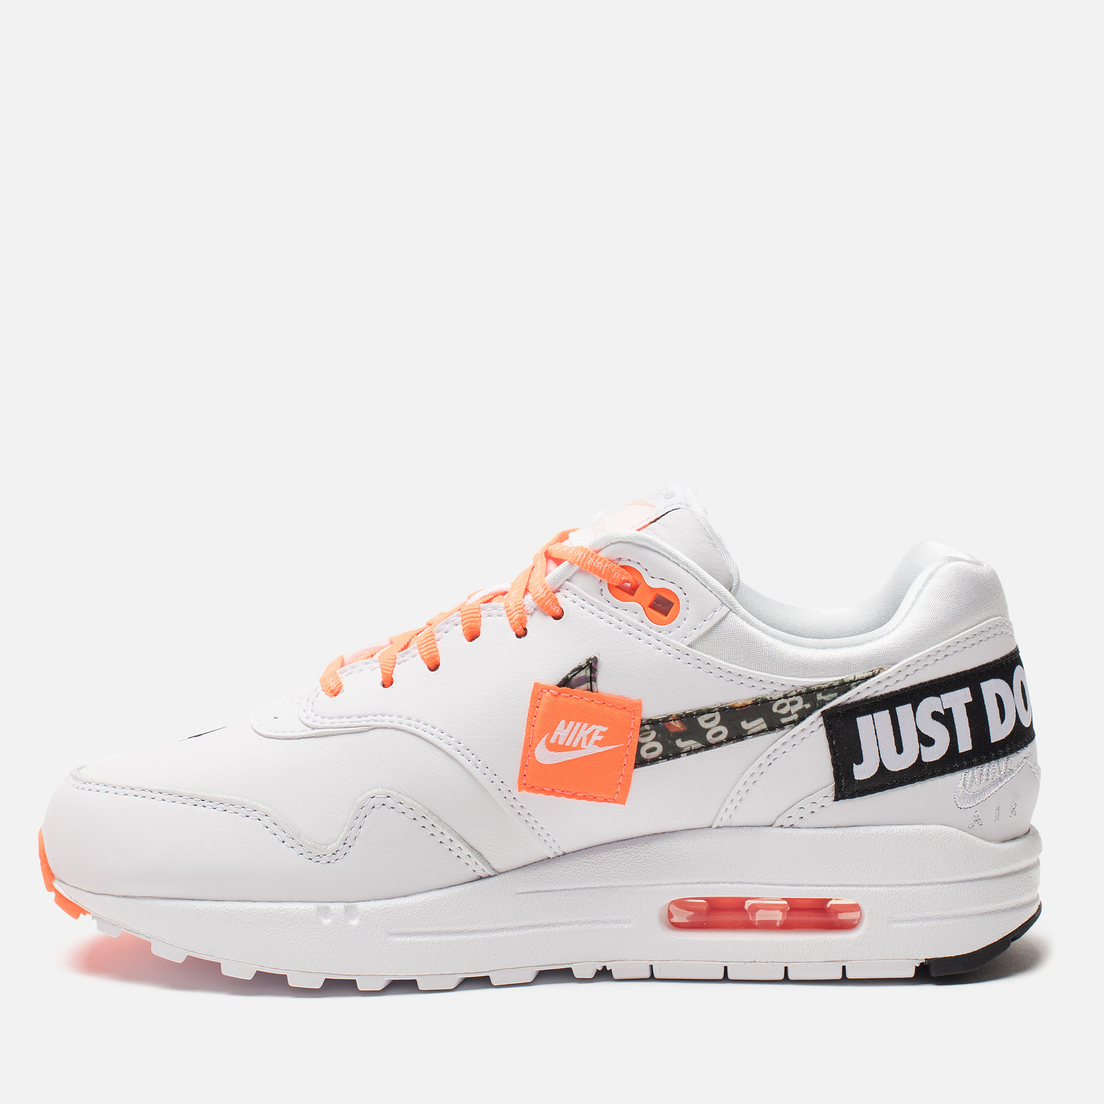 Nike Женские кроссовки Air Max 1 Lux Just Do It